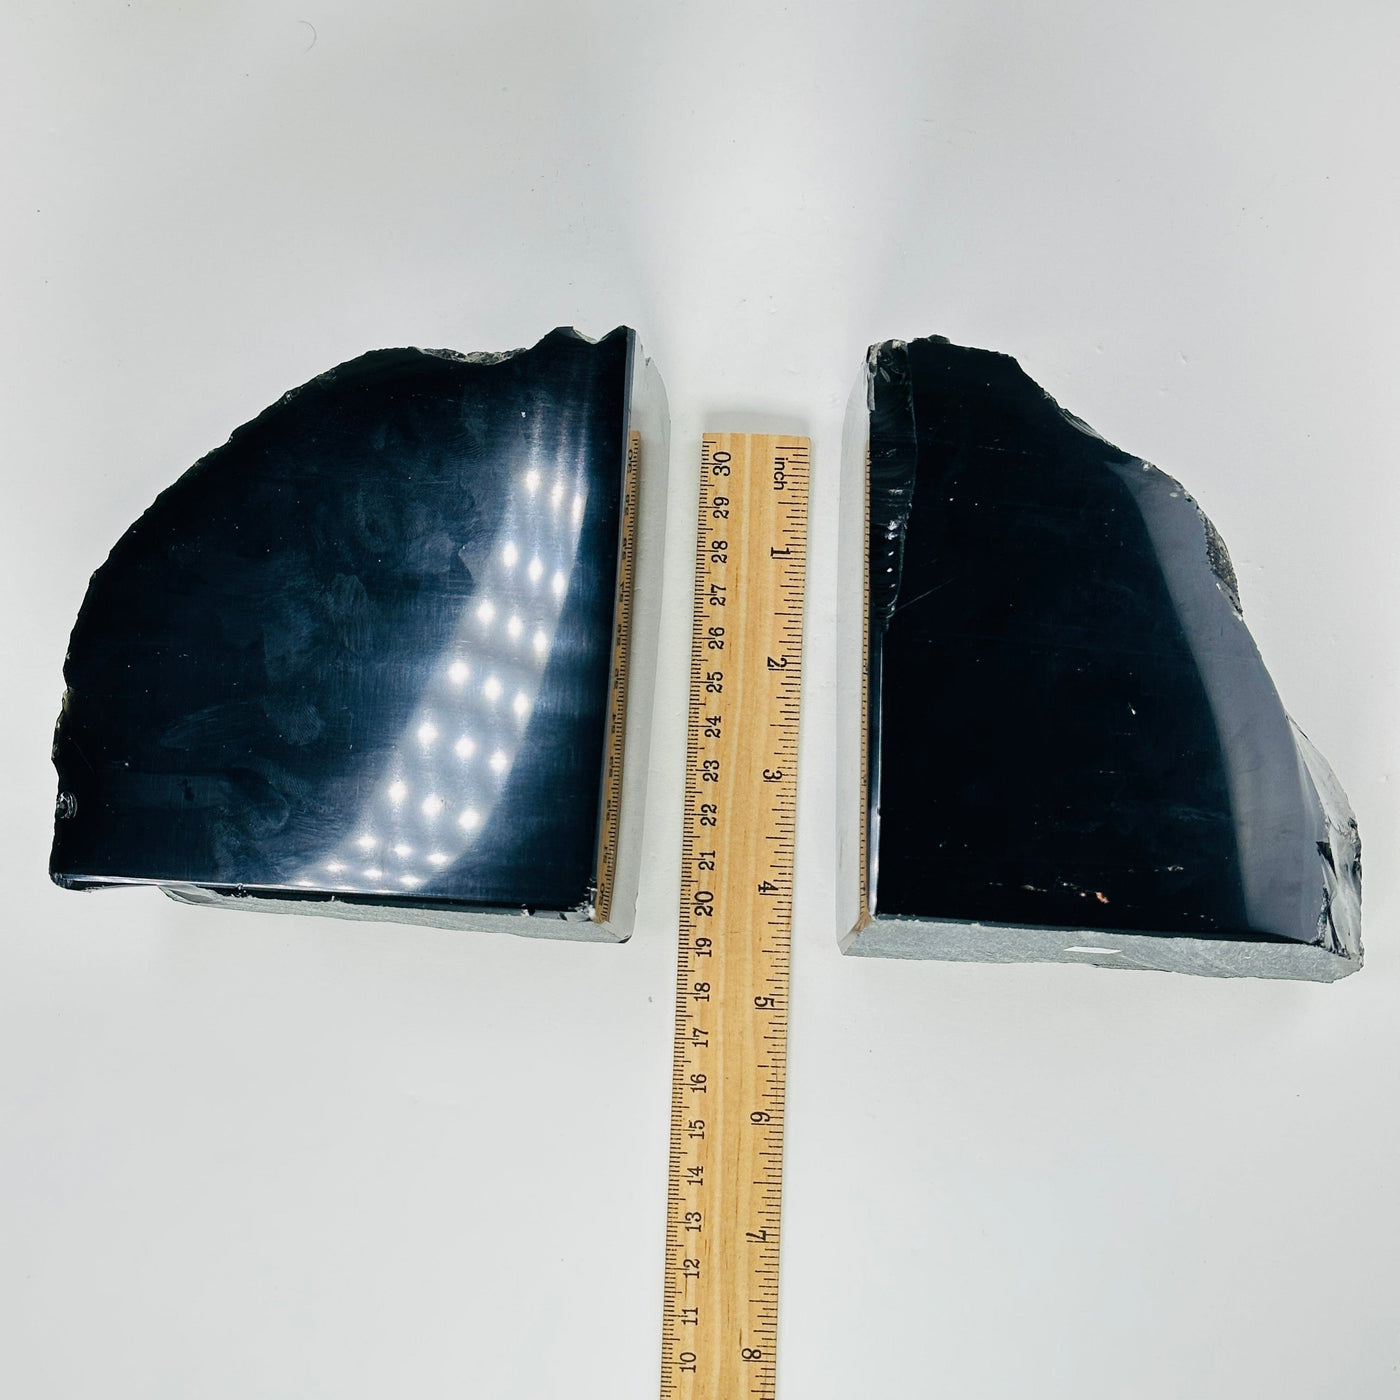 obsidian bookends next to a ruler for size reference